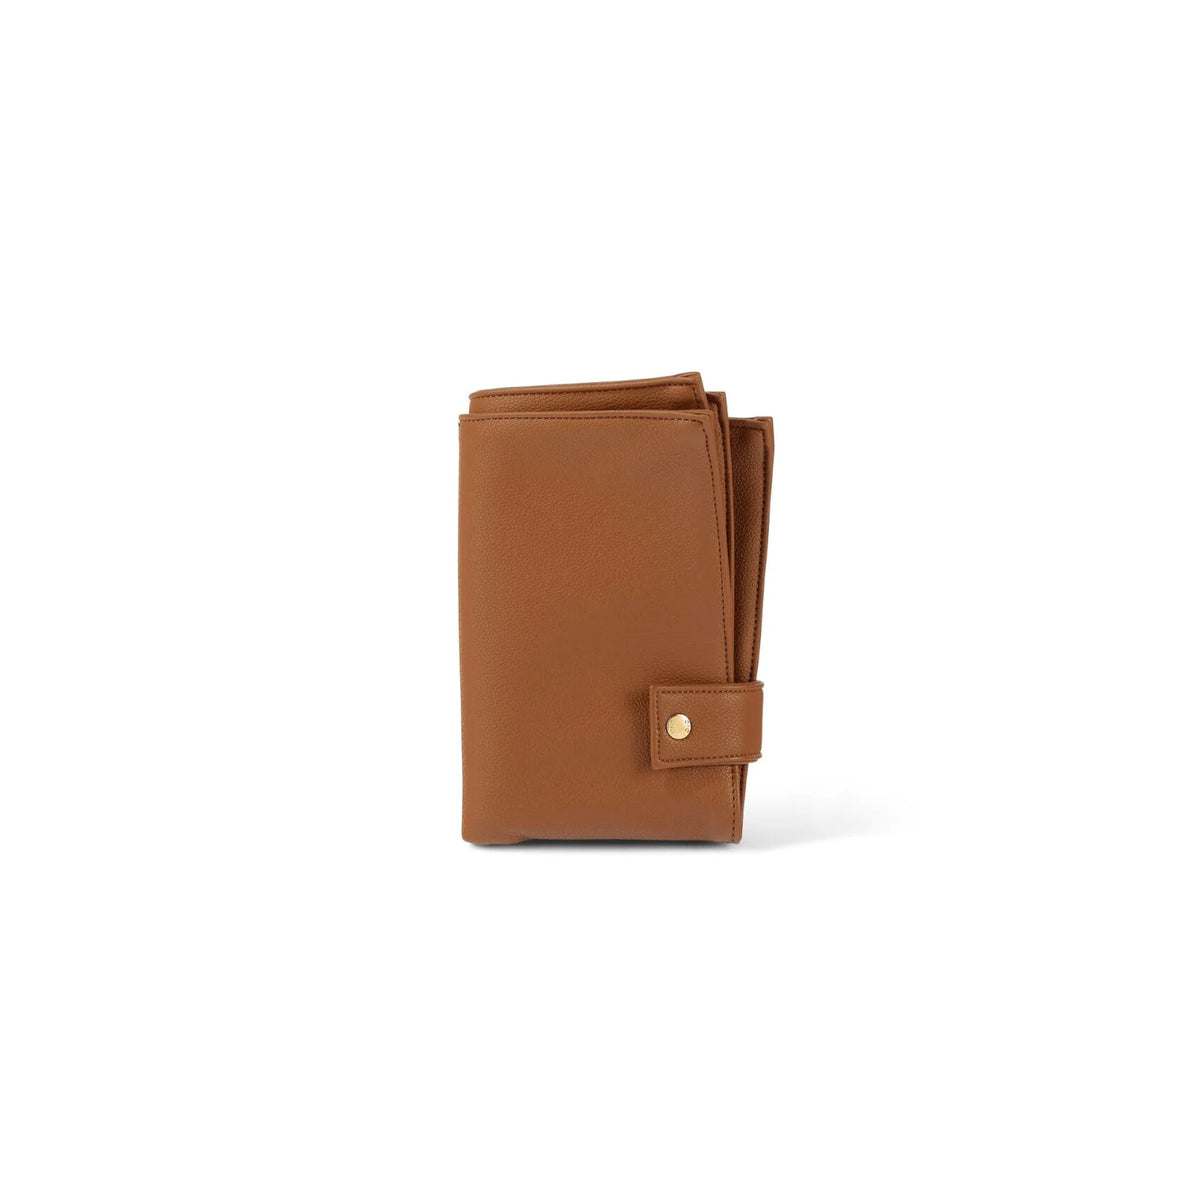 OiOi Nappy Changing Pouch Faux Leather - Chestnut Brown